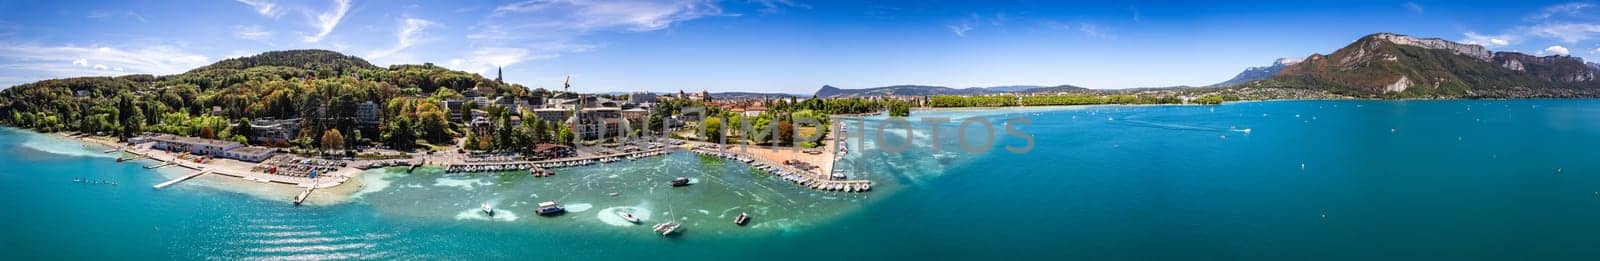 Aerial view of Annecy city Centre, gardens of Europe or jardins de l europe, in Haute Savoie, France, Europe